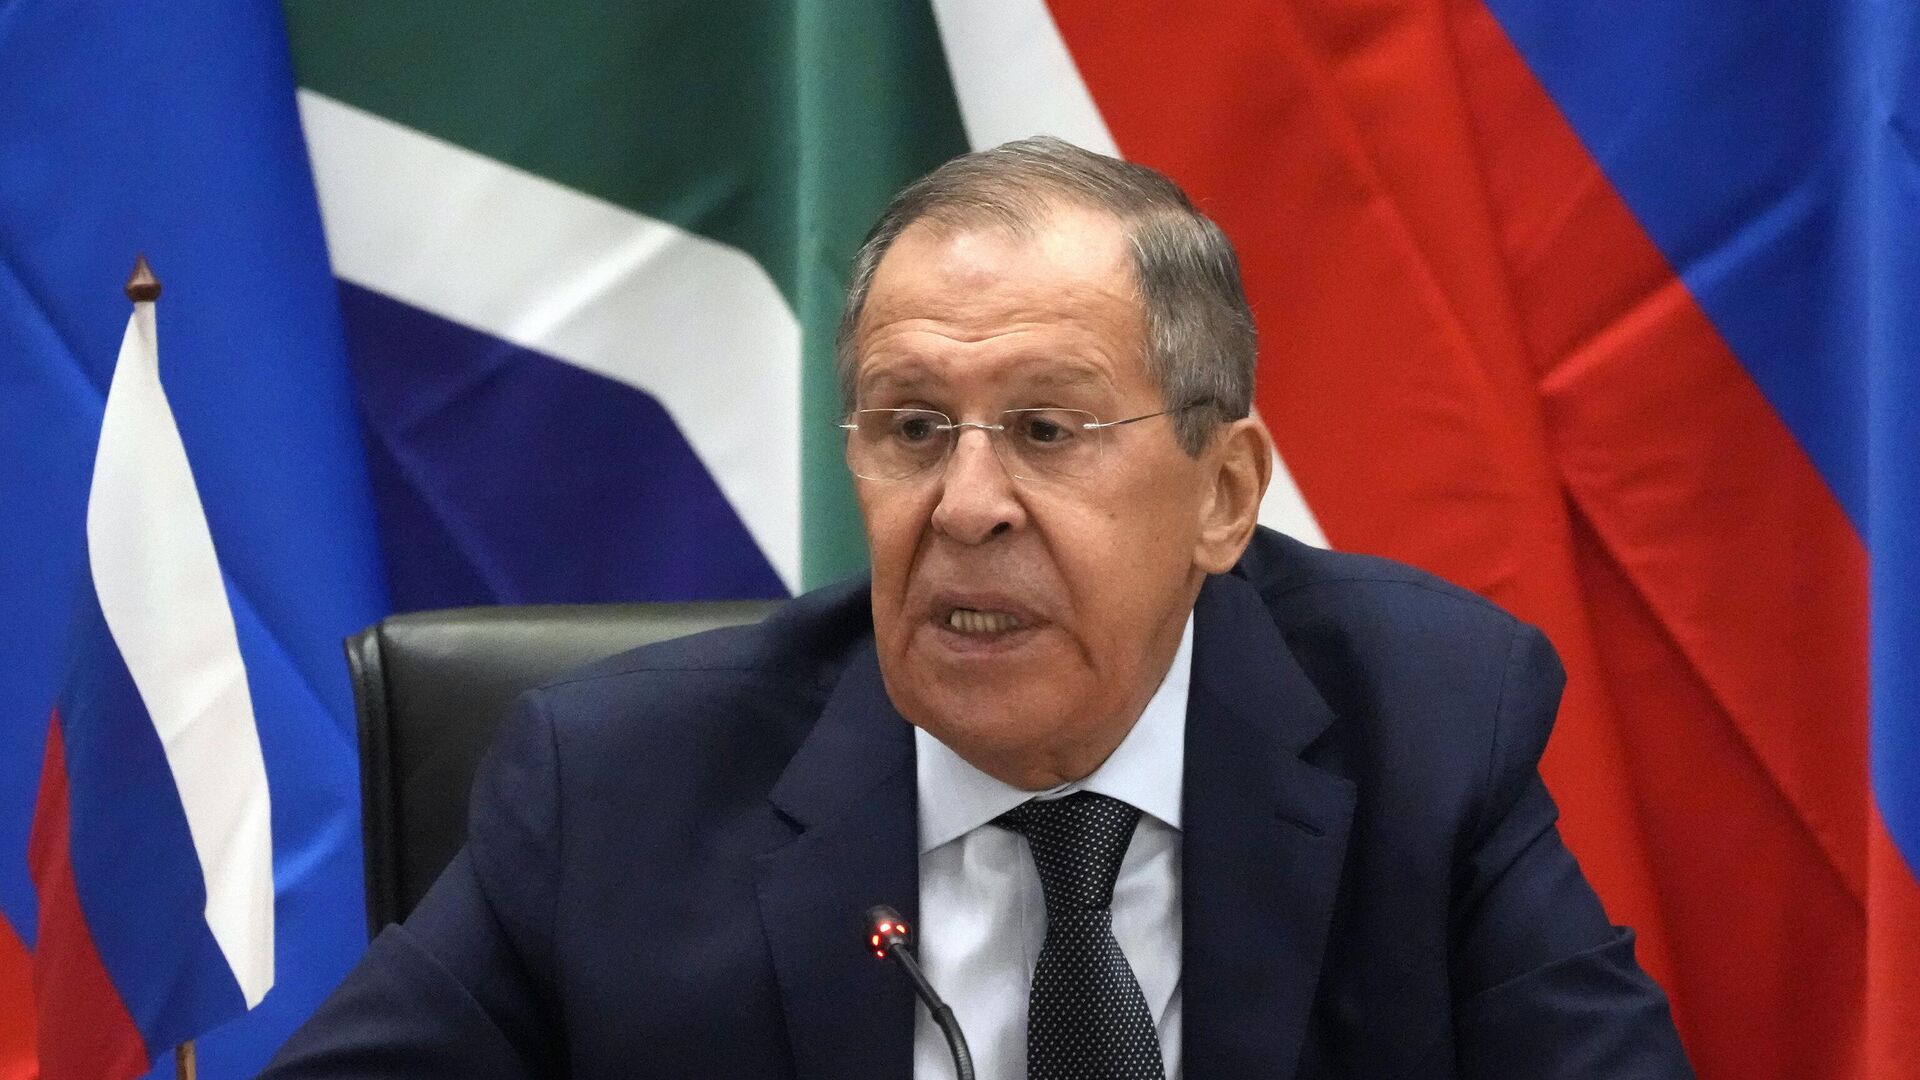 Russia's Foreign Minister Sergey Lavrov speaks during a media briefing after meeting with his South Africa's counterpart Naledi Pandor in Pretoria, South Africa, Monday, Jan. 23, 2023.  - Sputnik International, 1920, 24.01.2023